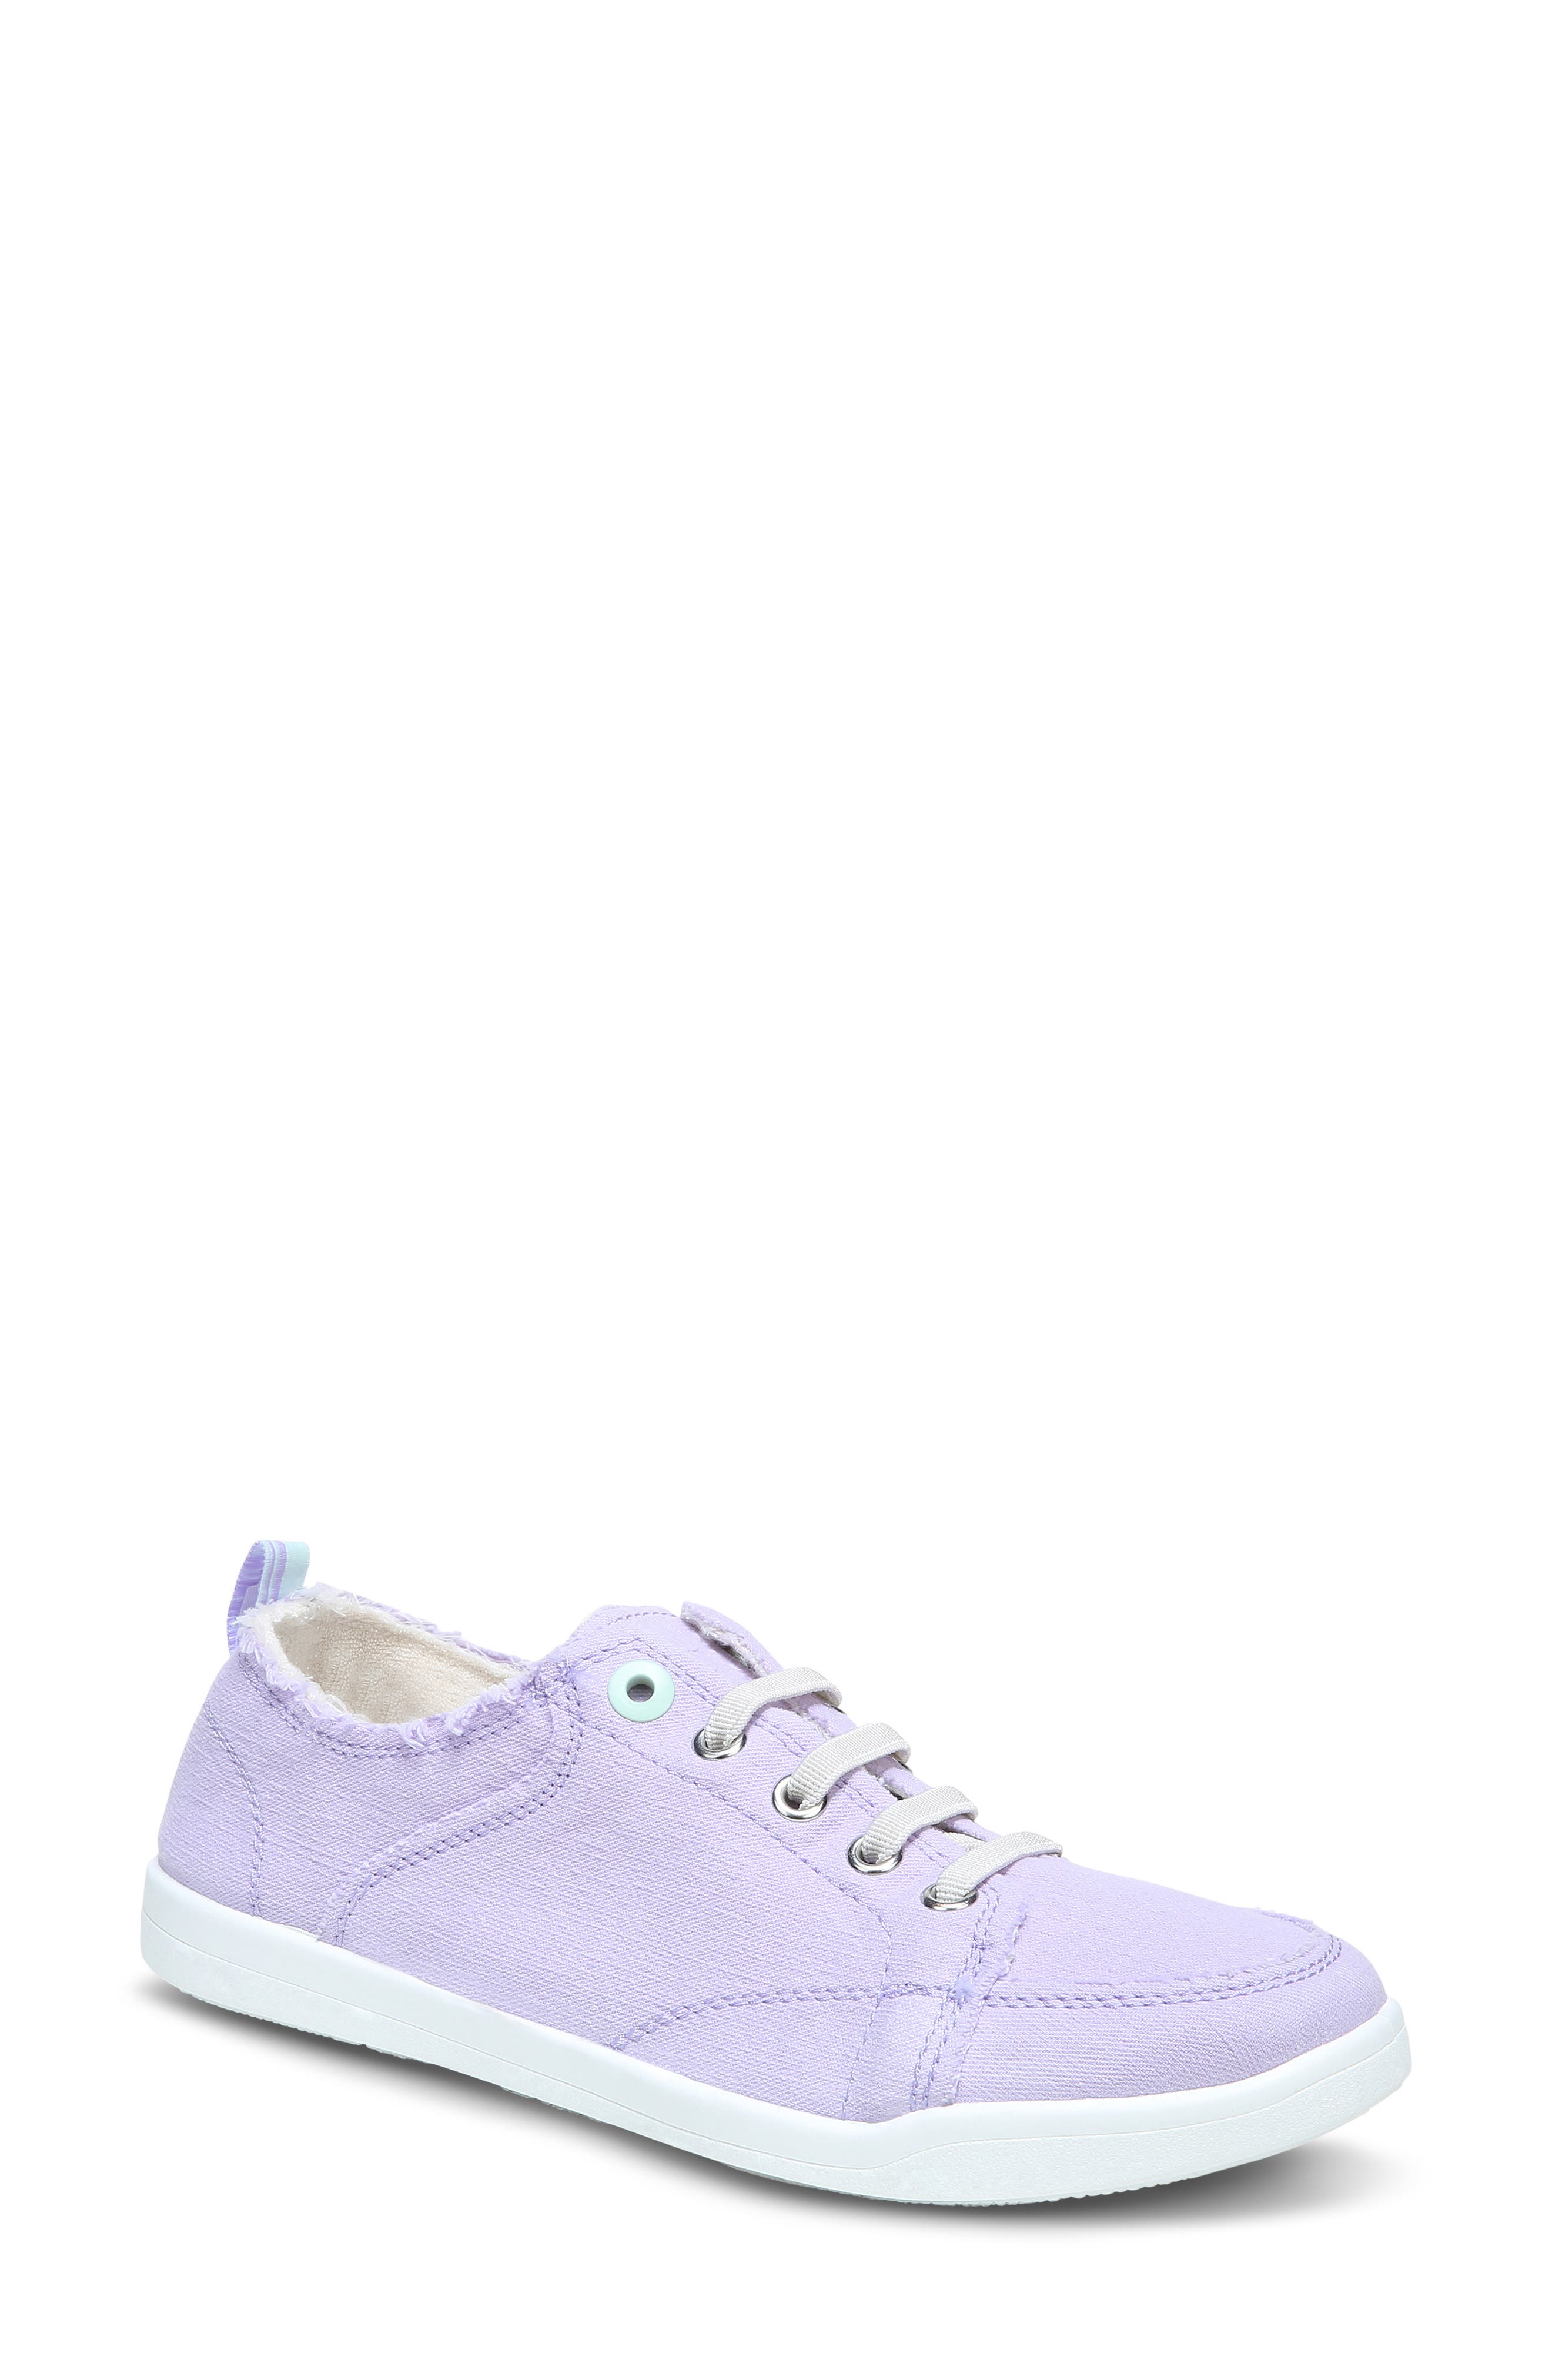 Vionic Beach Collection Pismo Lace-up Sneaker In Pastel Lilac Canvas